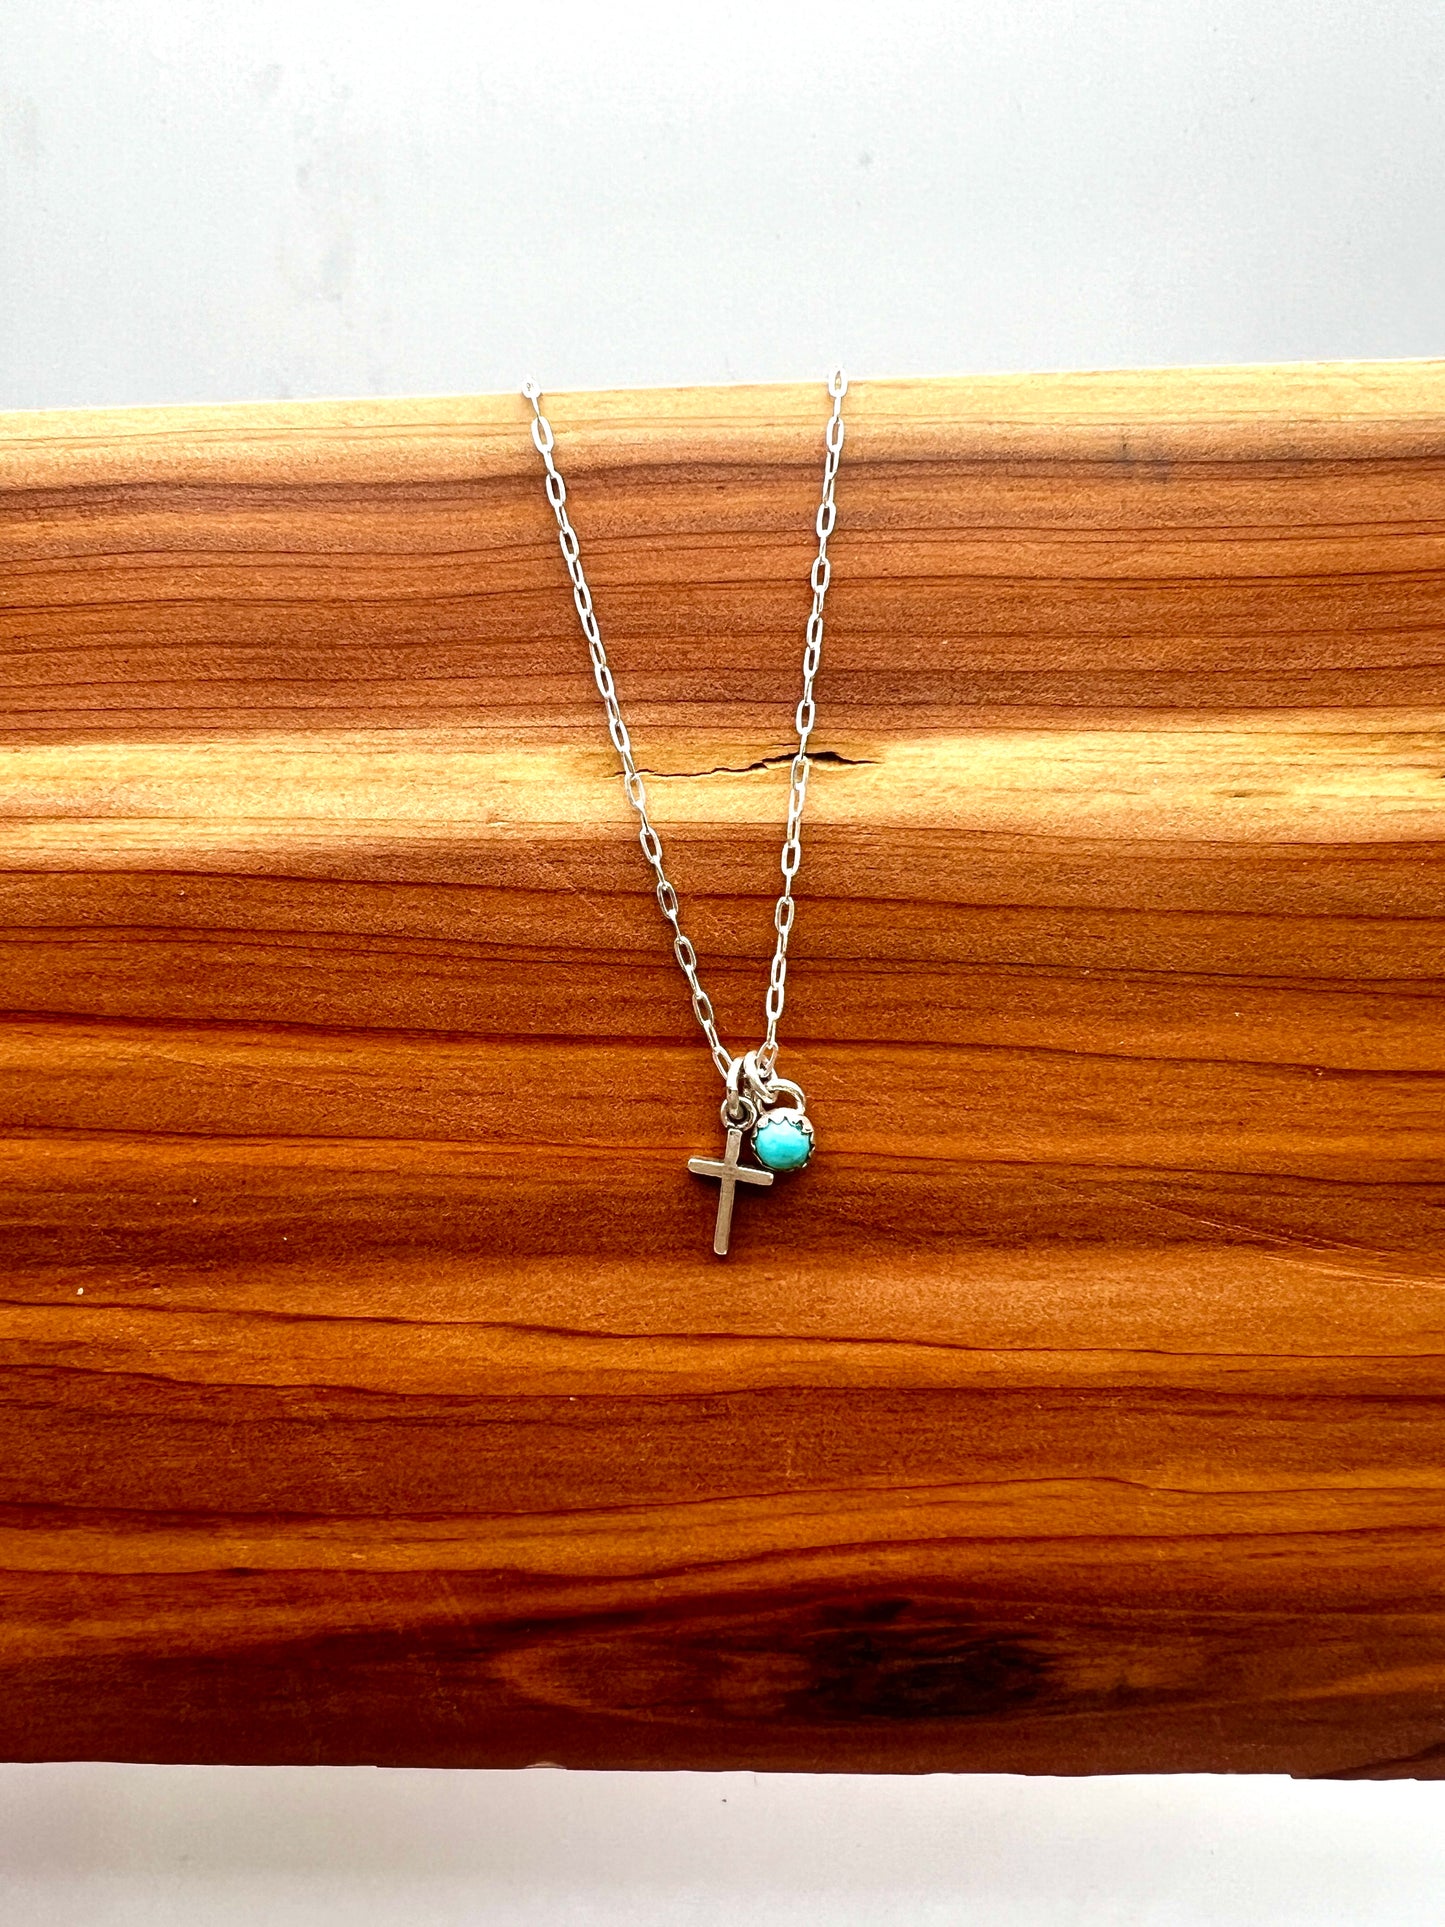 Cactus Rose Studios Delicate cross with turquoise